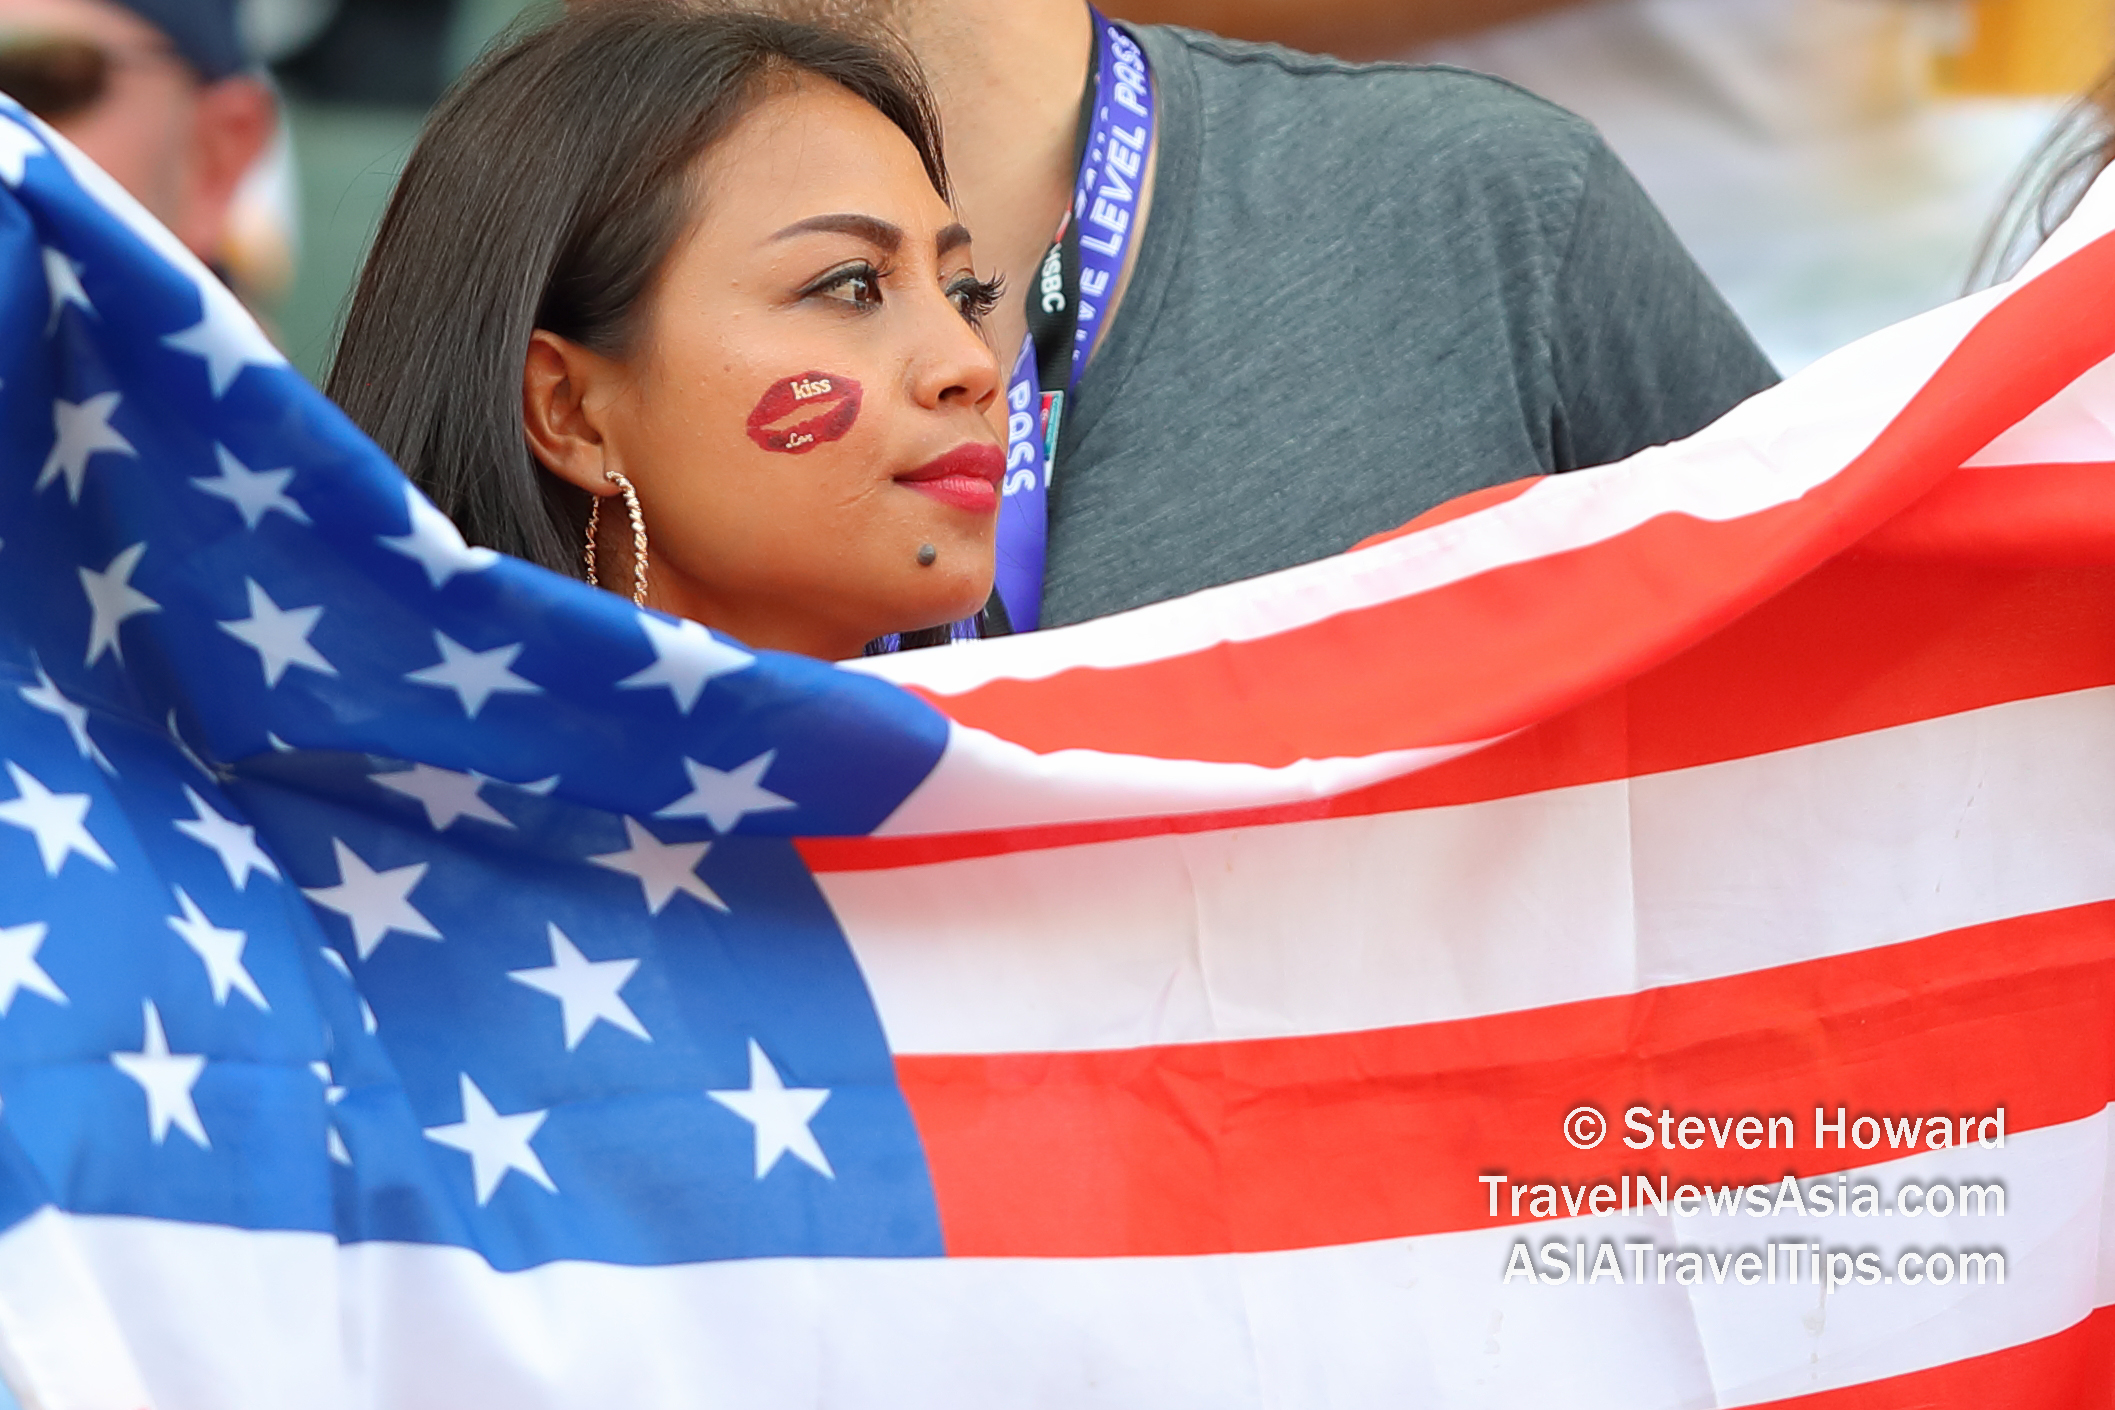 Beautiful Team USA fan at the Cathay Pacific / HSBC Hong Kong Sevens 2019. Picture by Steven Howard of TravelNewsAsia.com Click to enlarge.